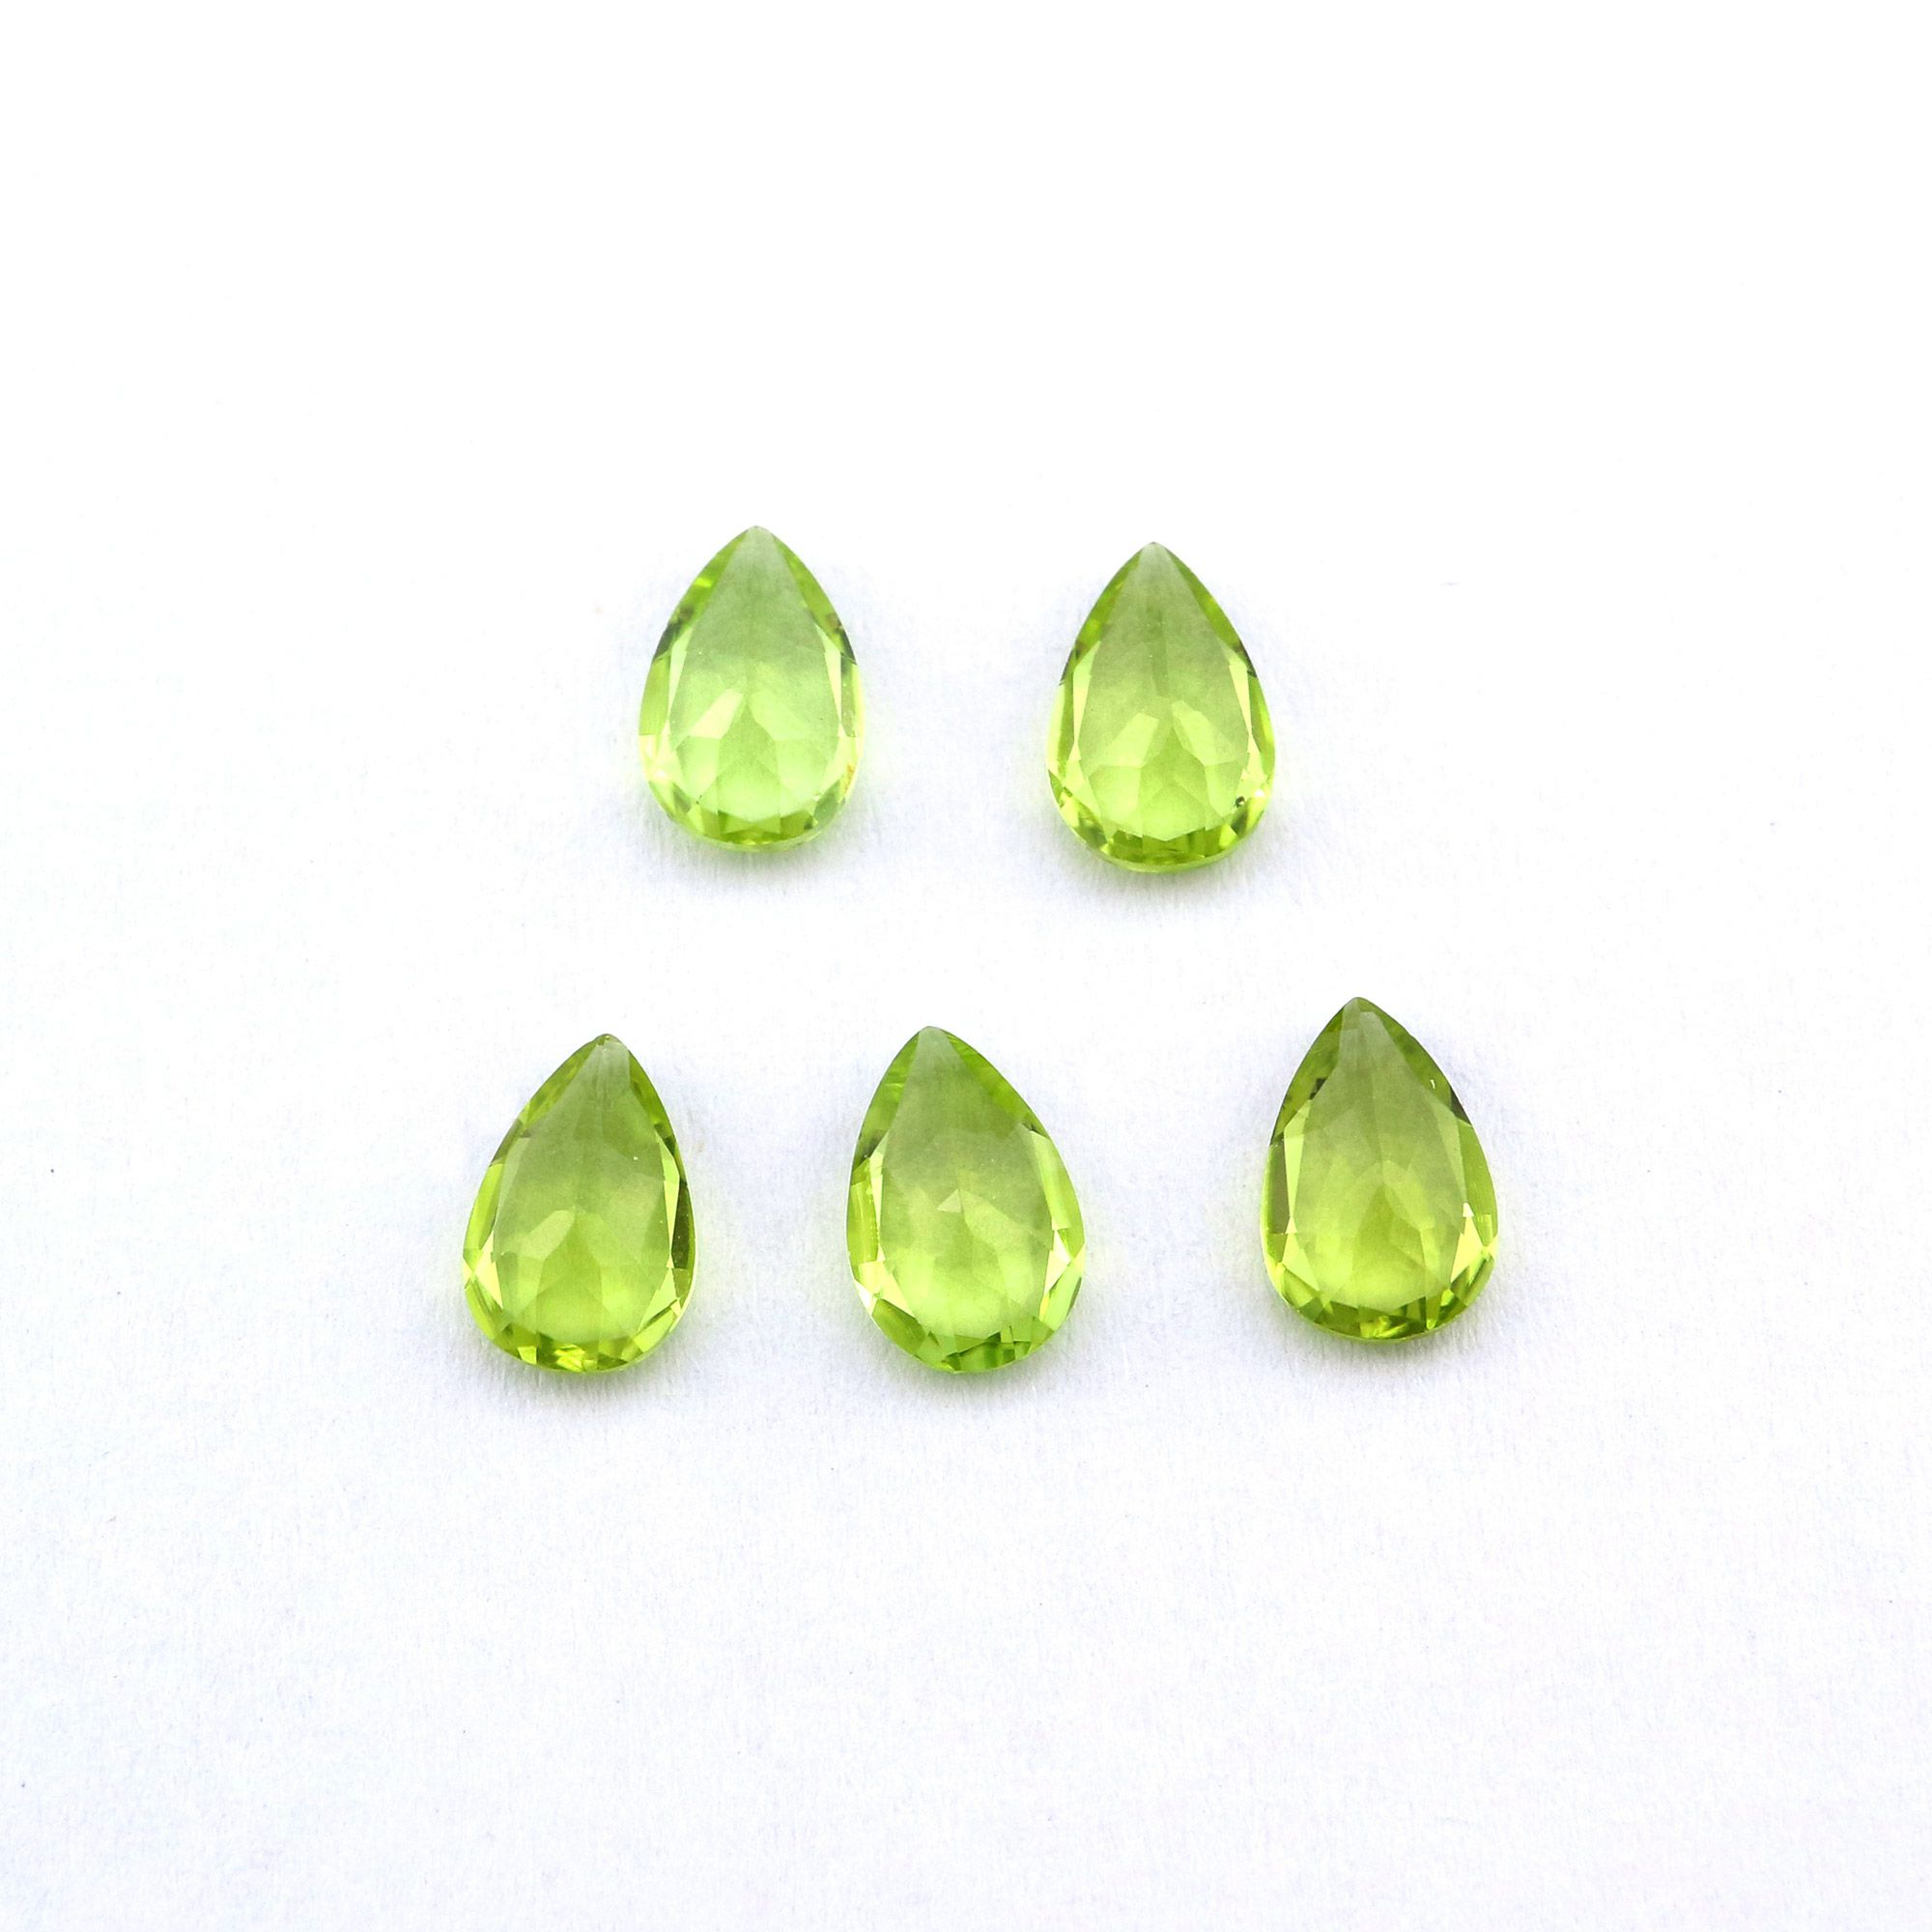 1Pcs Pear Green Peridot August Birthstone Faceted Cut Loose Gemstone Natural Semi Precious Stone DIY Jewelry Supplies 4150006 - Click Image to Close